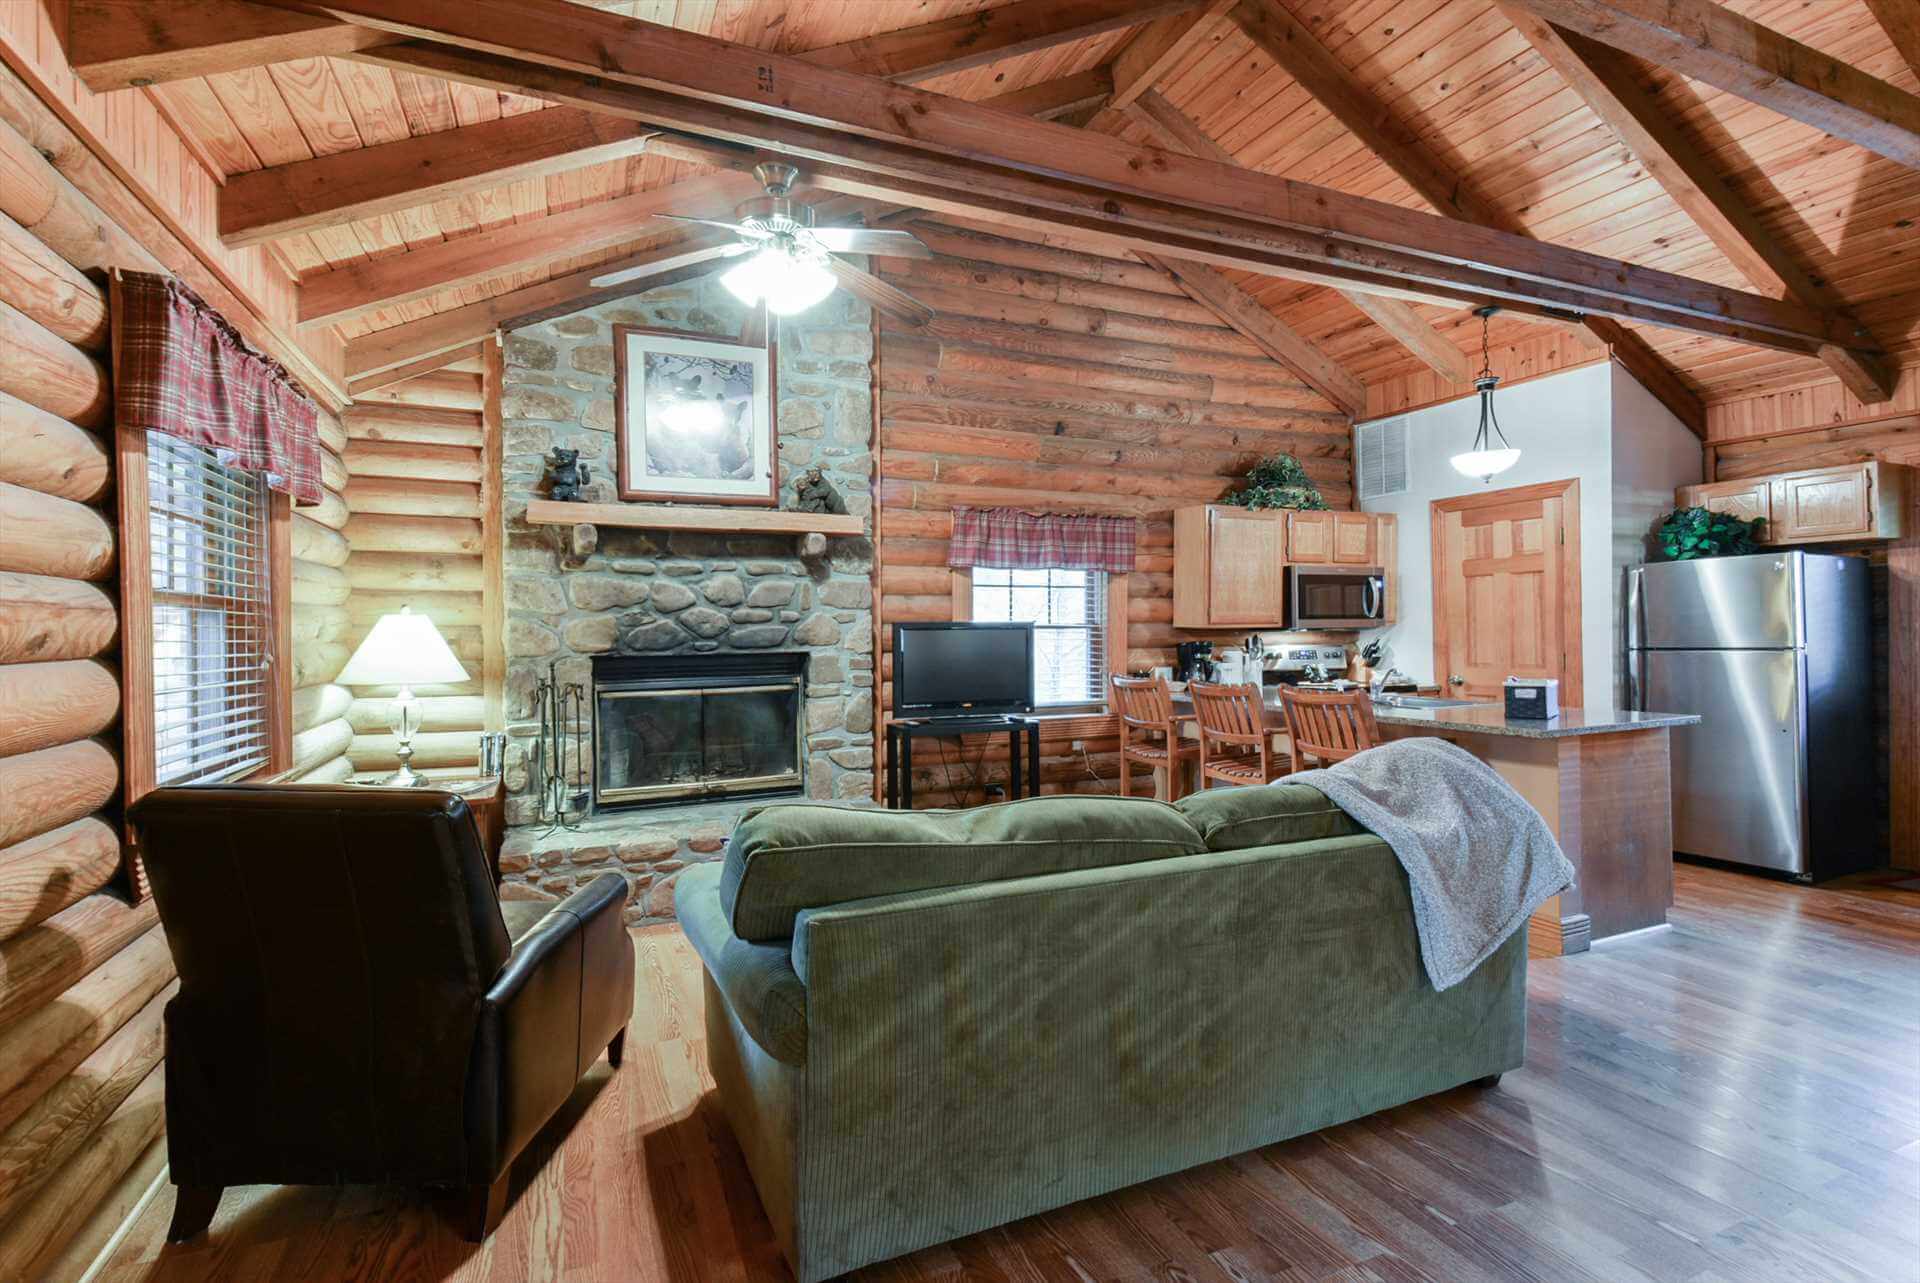 A photo of inside a Branson lodging location. This is a cabin living room furnished with sofas and chairs.